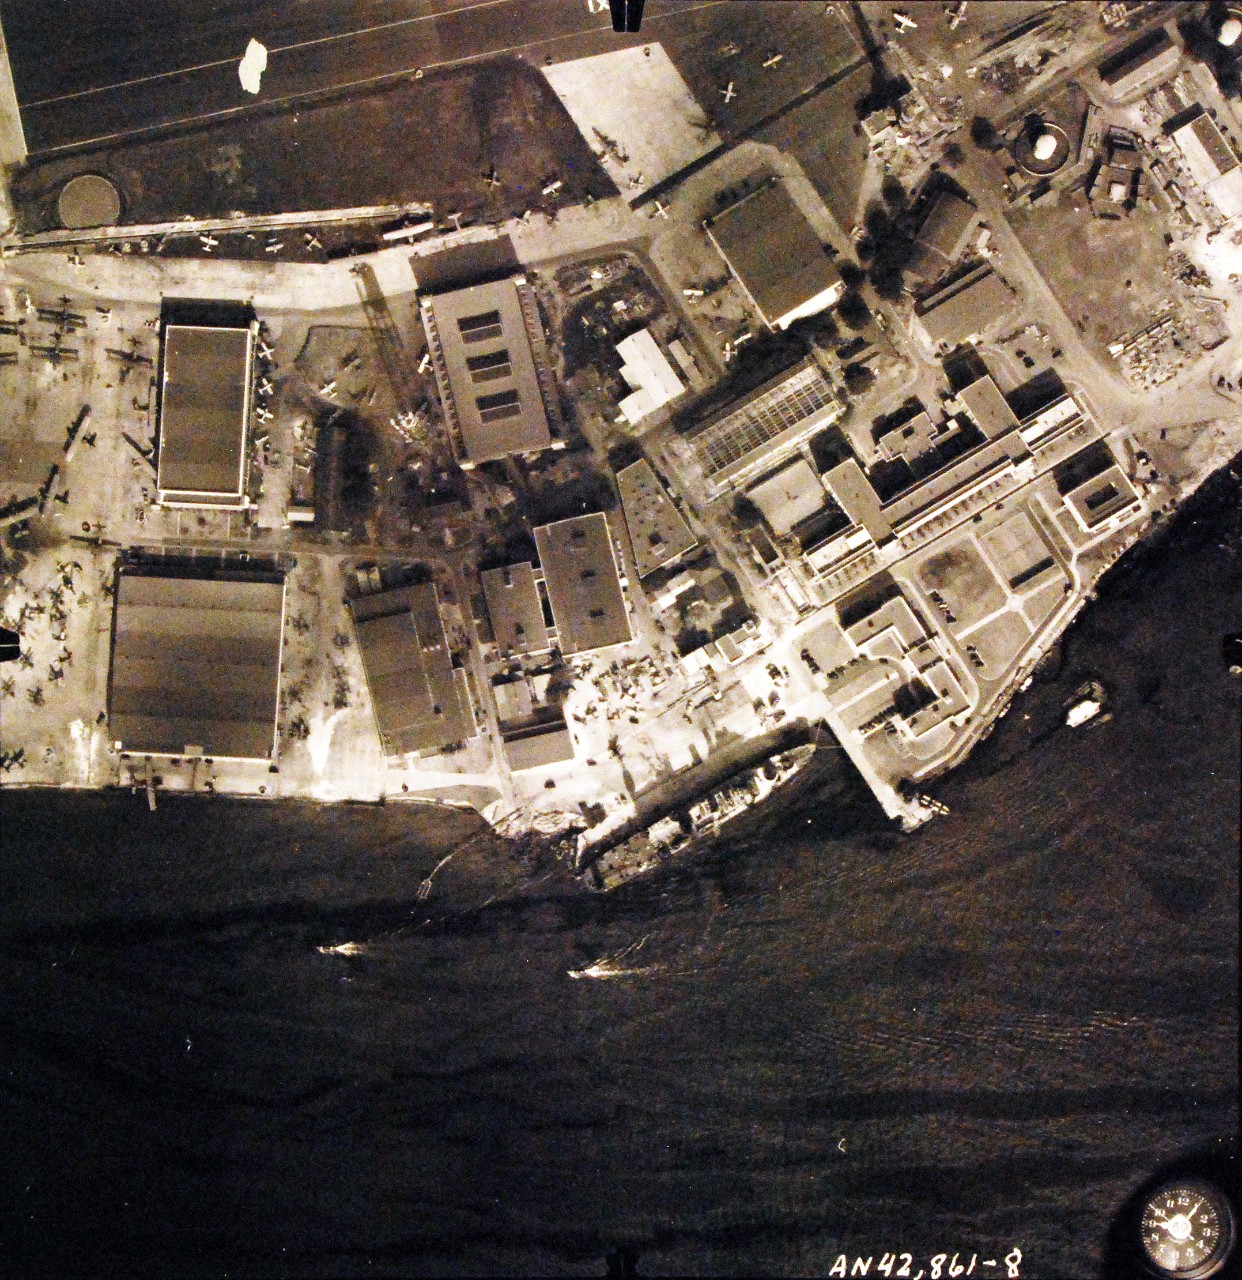 80-G-387569:  Pearl Harbor Attack, 7 December 1941.  Aerial view of "Battleship Row" moorings on the southern side of Ford Island, 10 December 1941, showing damage from the Japanese raid three days earlier.  USS Curtiss (AV 4) is shown.  Note dark oil streaks on the harbor surface, originating from the sunken battleships.  Photographed by VJ-1 at an altitude of 3,000 feet and released November 9, 1950. U.S. Navy photograph, now in the collections of the National Archives.   (9/22/2015).